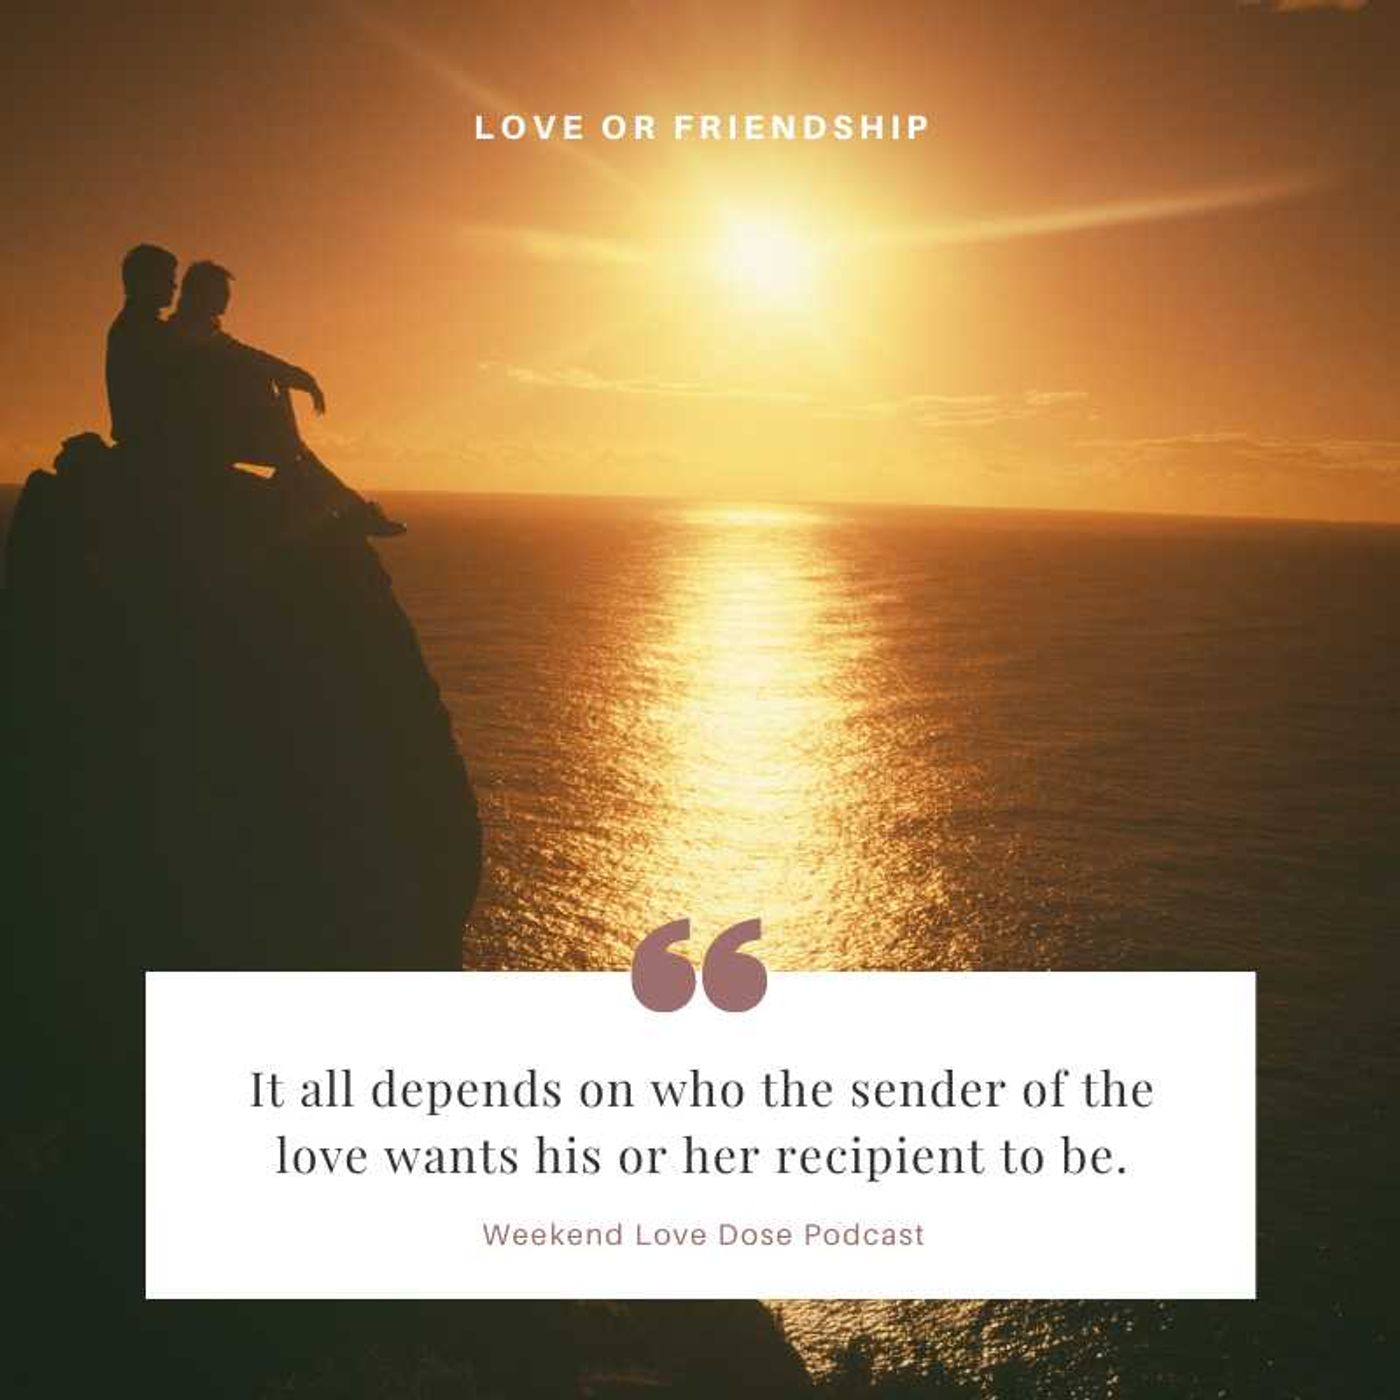 Love or Friendship? Which would you pick?